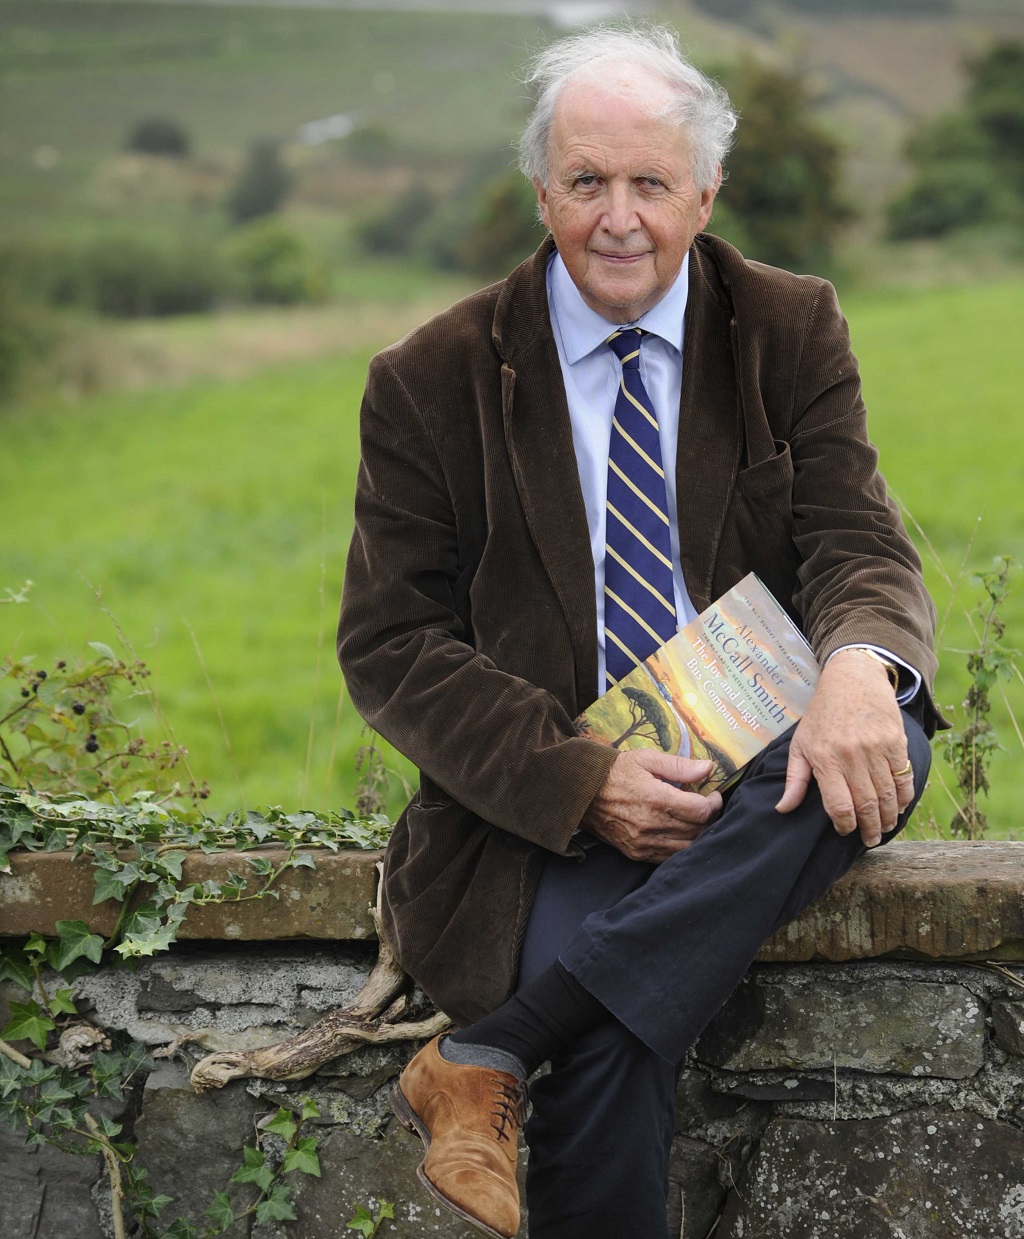 Alexander McCall Smith spoke about his writing at the Wigtown Book Festival (Photo: Colin Hattersley)